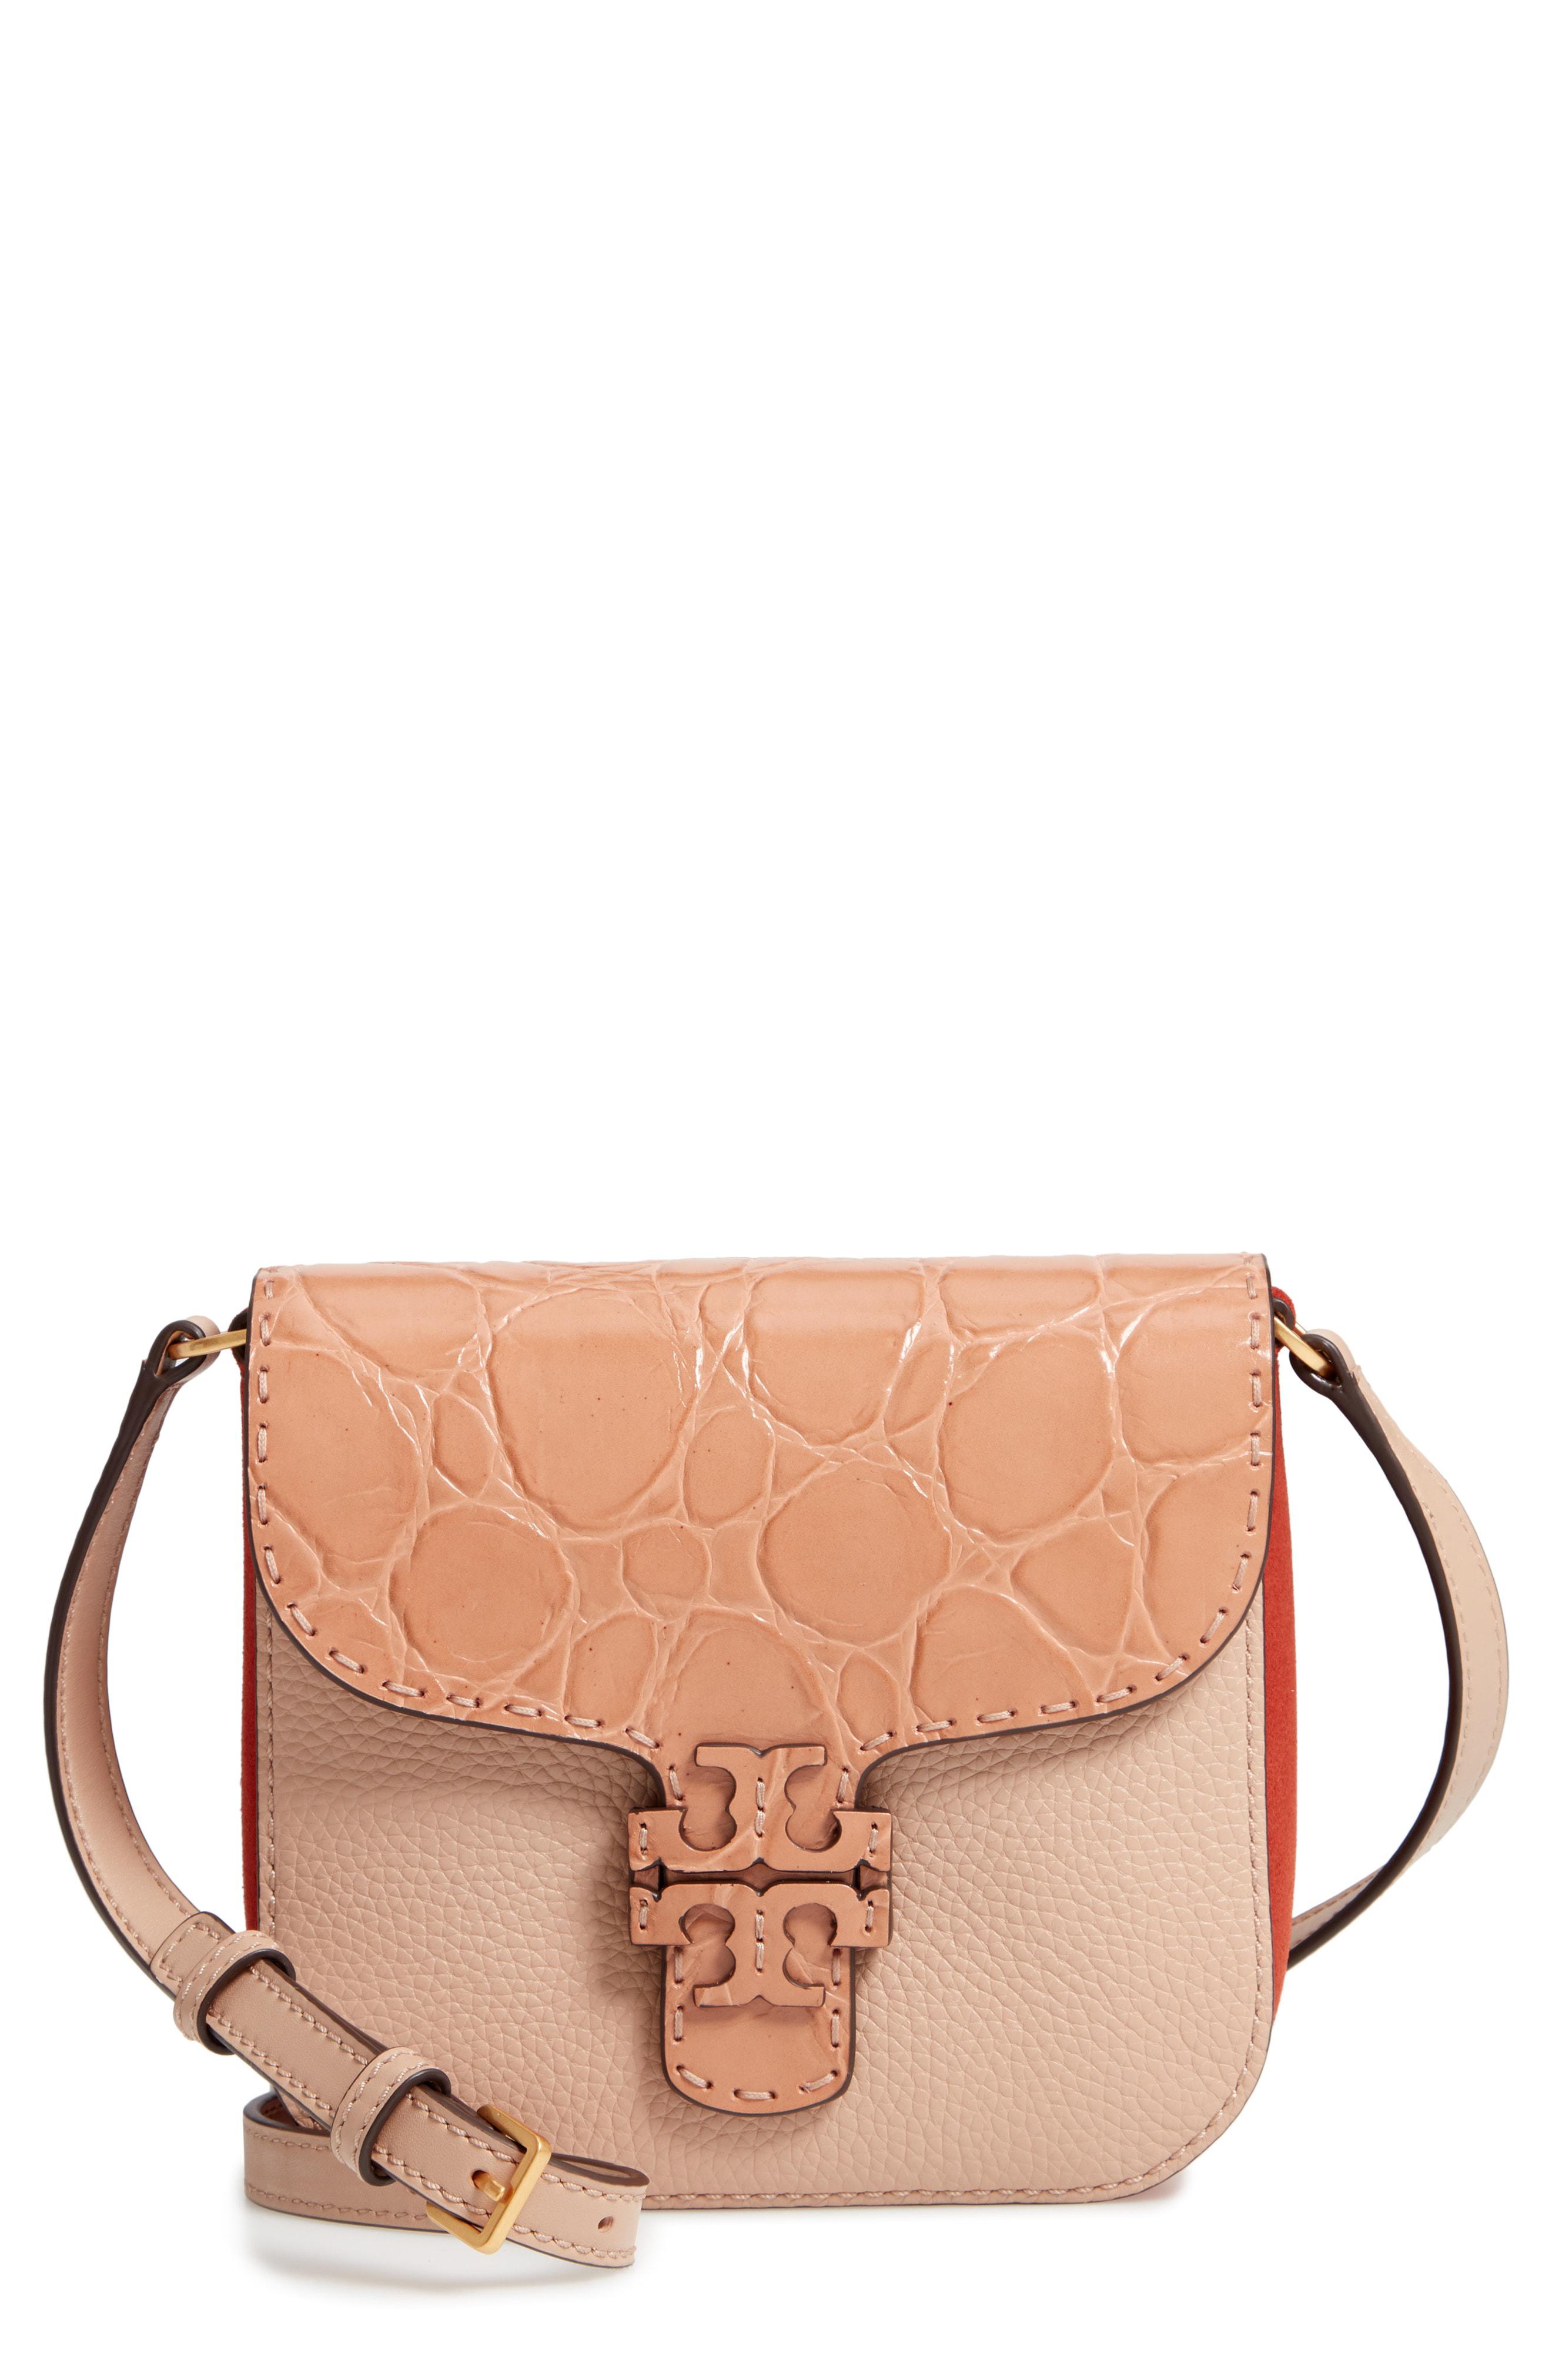 Tory Burch Mcgraw Croc Embossed Leather Crossbody Bag in Brown - Lyst